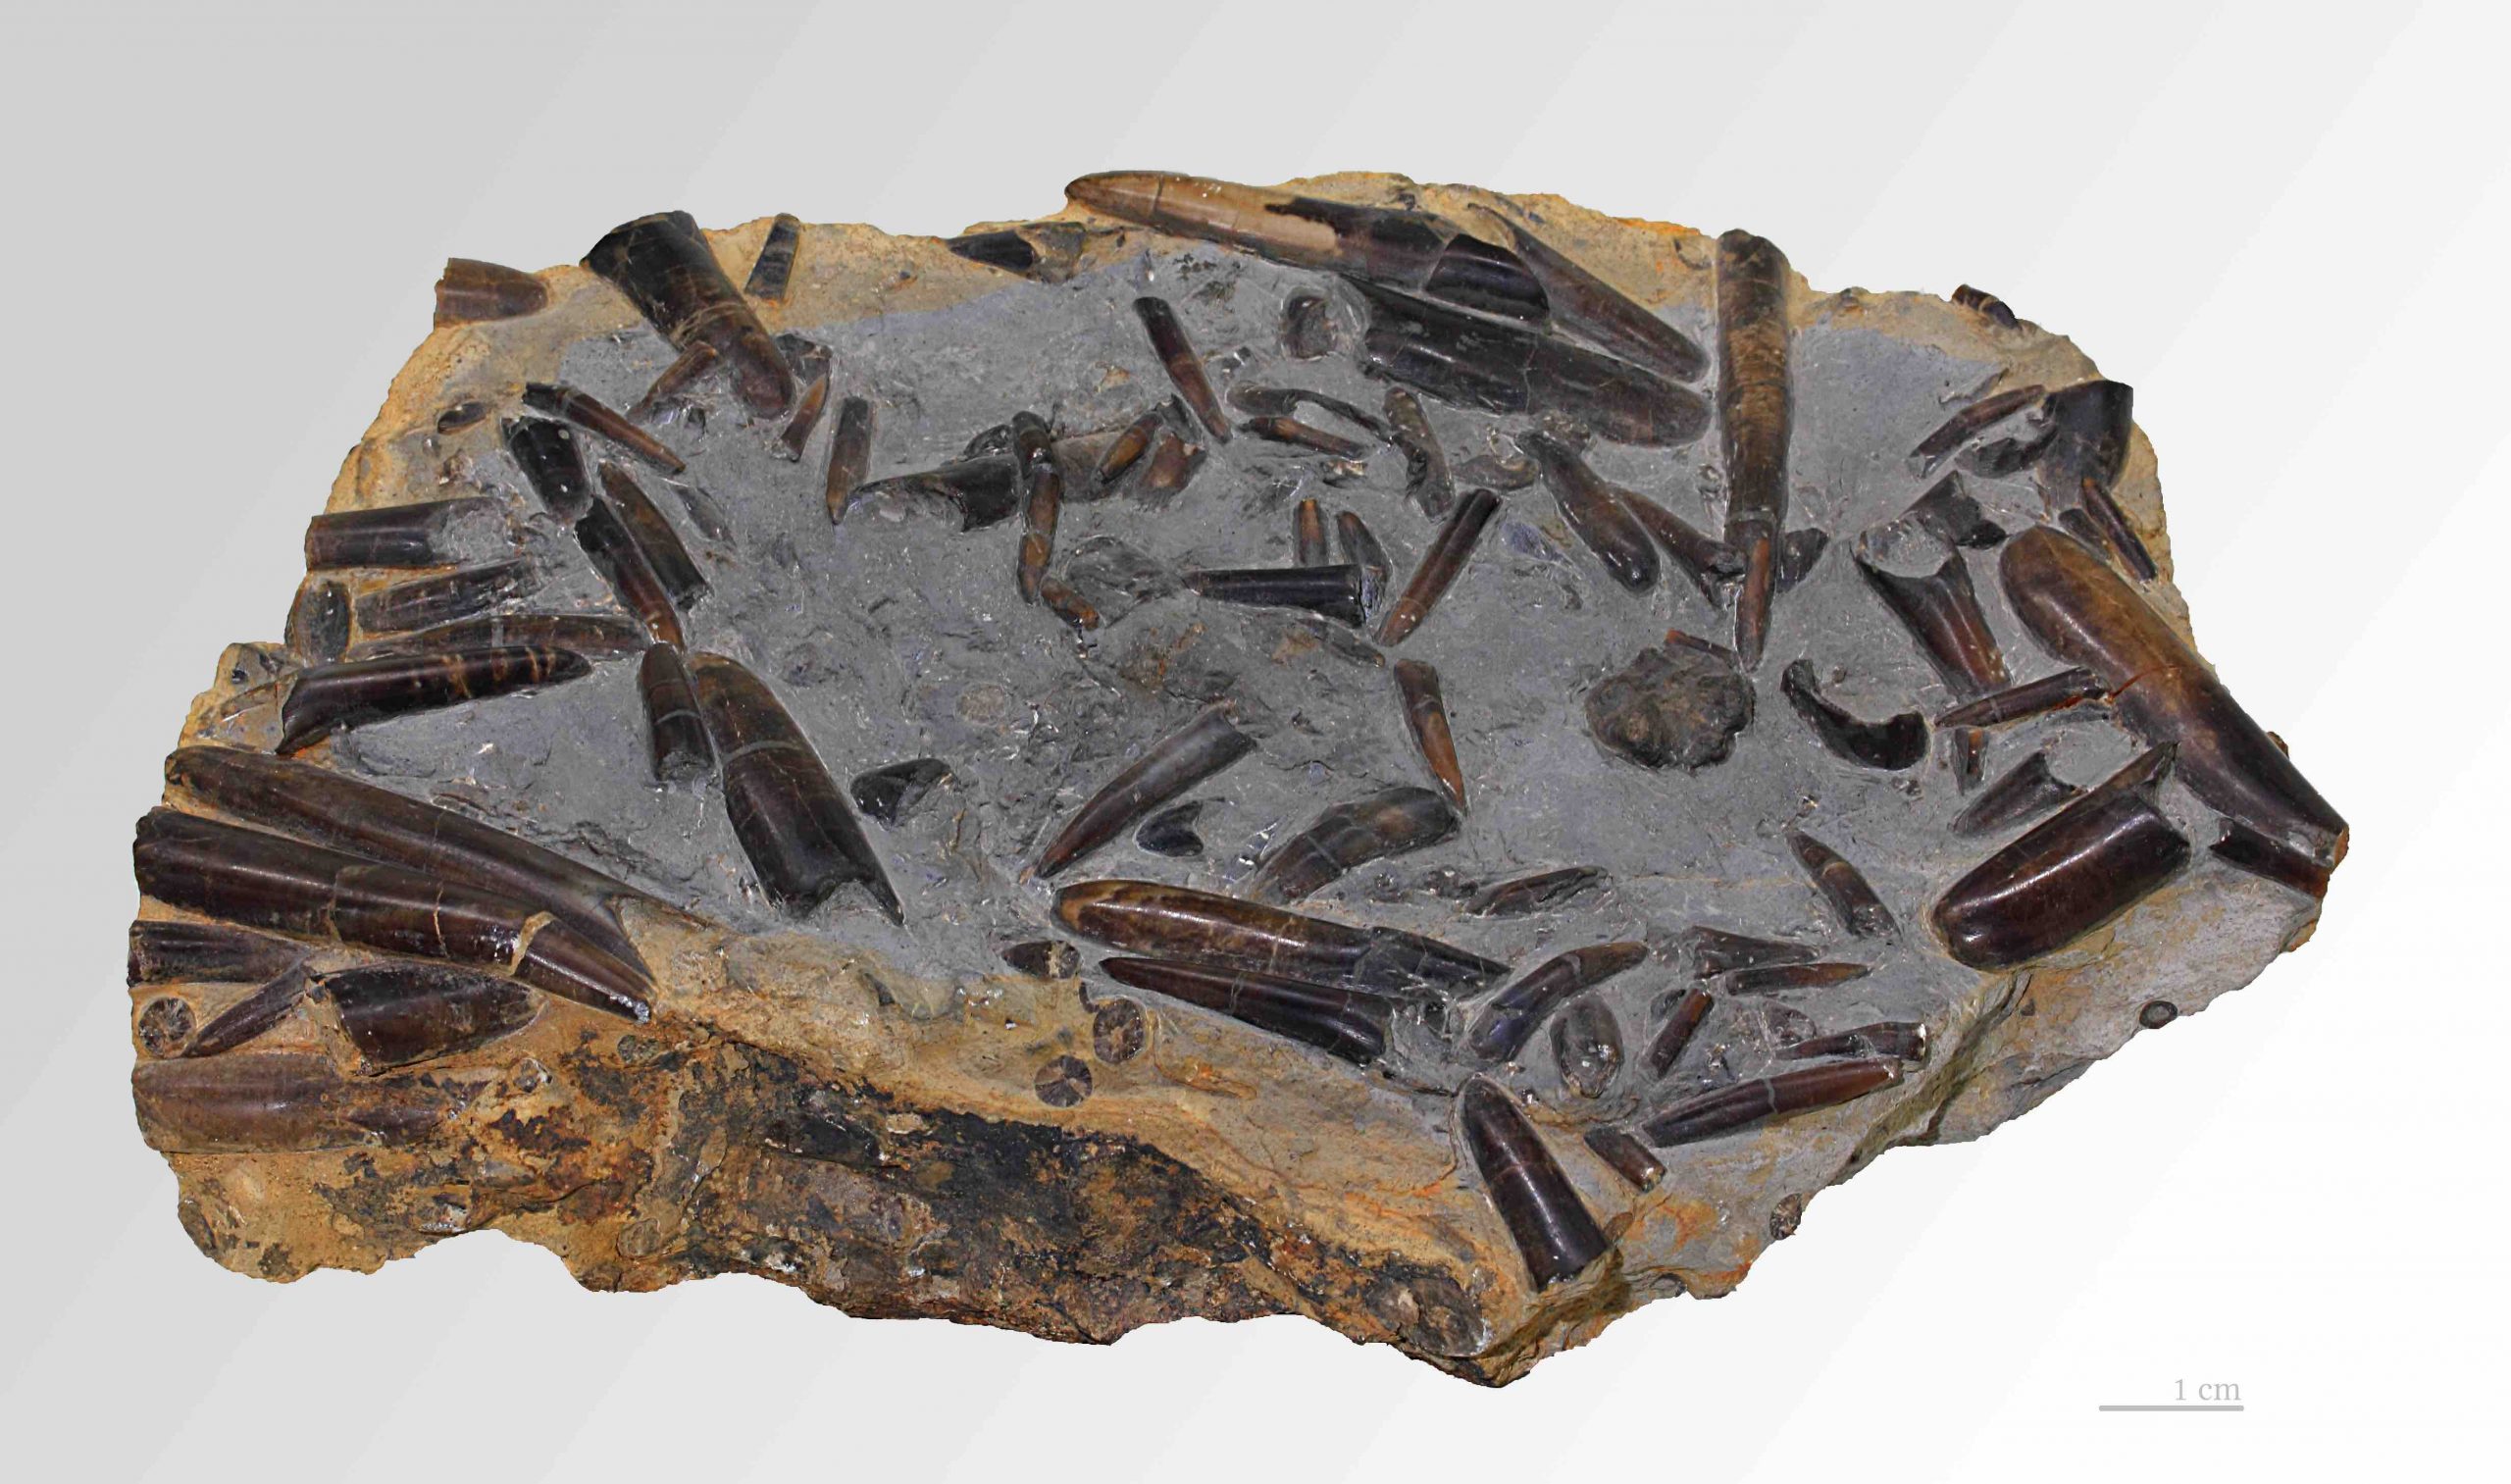 The belemnite fossils are the cone-shaped objects in this sedimentary rock.